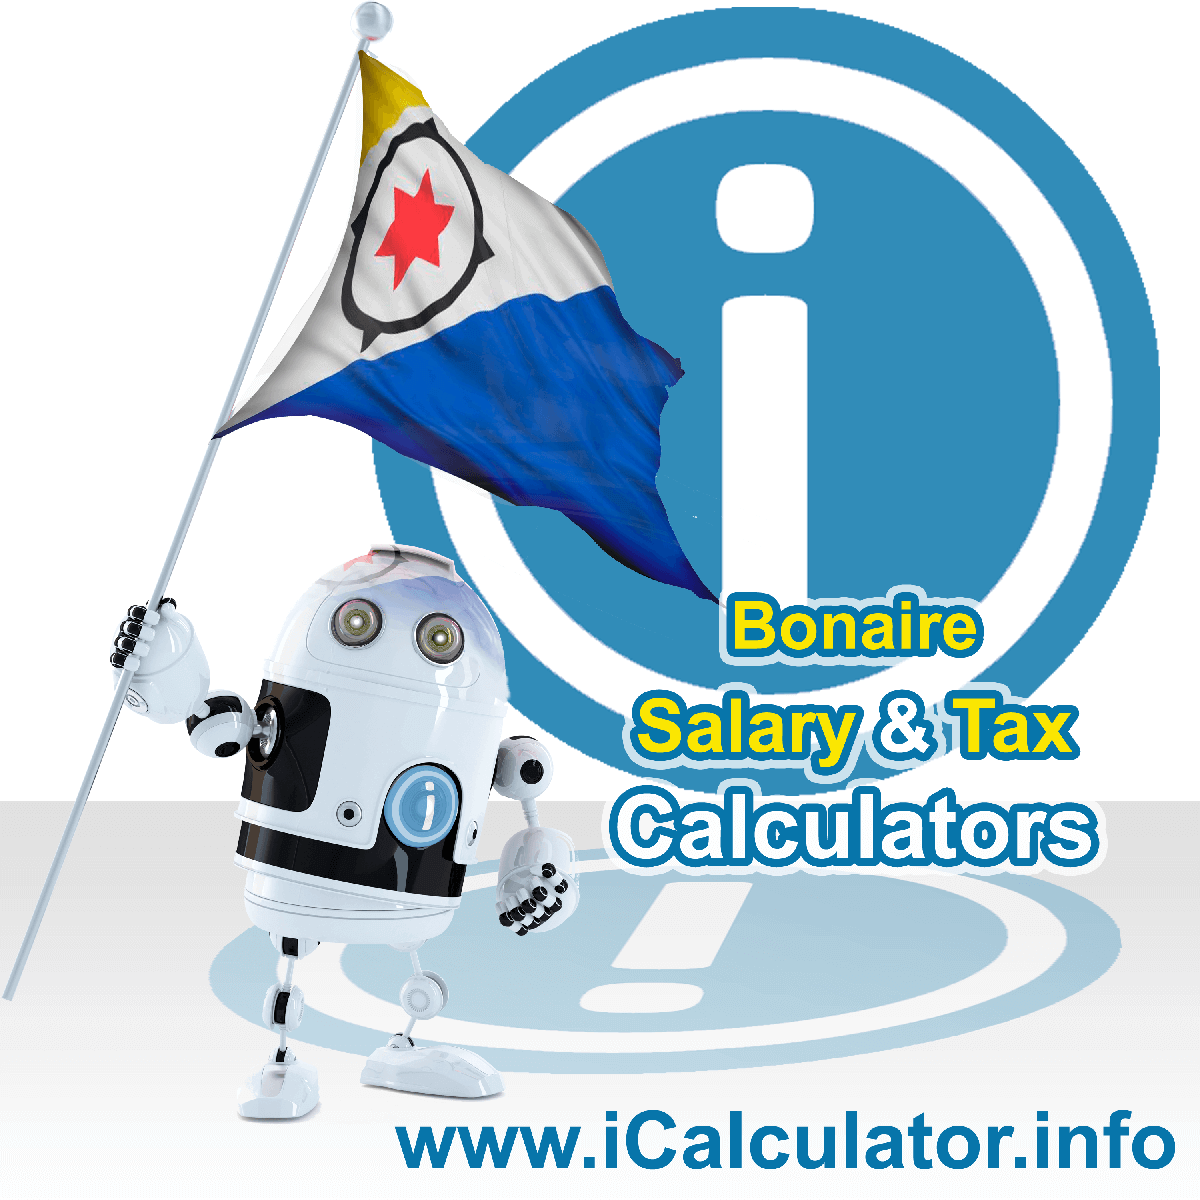 Bonaire Tax Calculator. This image shows the Bonaire flag and information relating to the tax formula for the Bonaire Salary Calculator